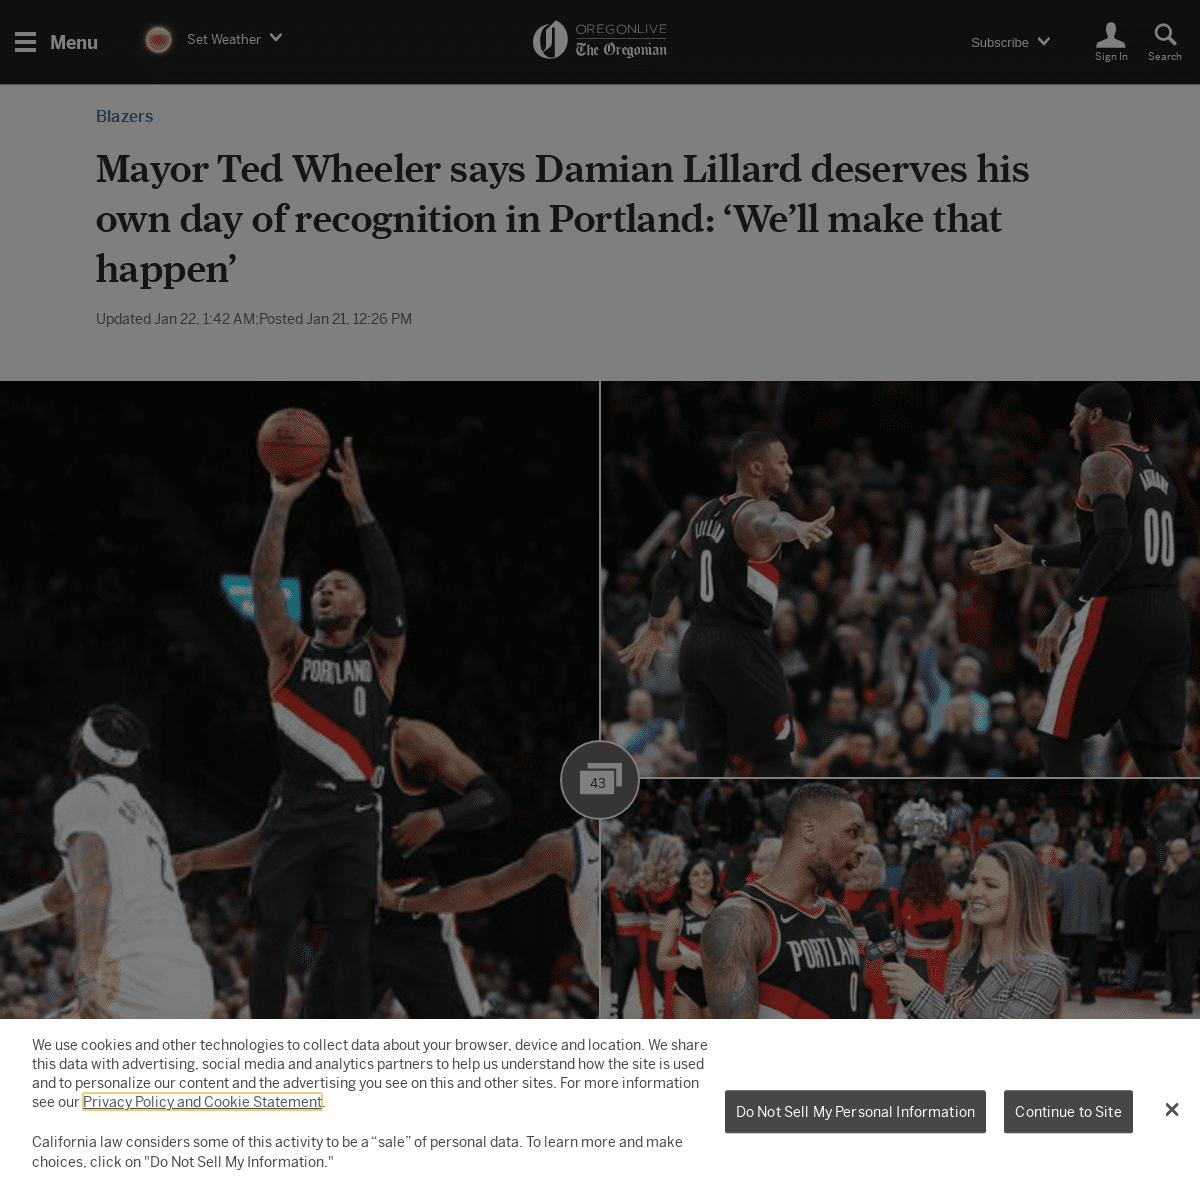 A complete backup of www.oregonlive.com/blazers/2020/01/mayor-ted-wheeler-says-damian-lillard-deserves-his-own-day-of-recognitio